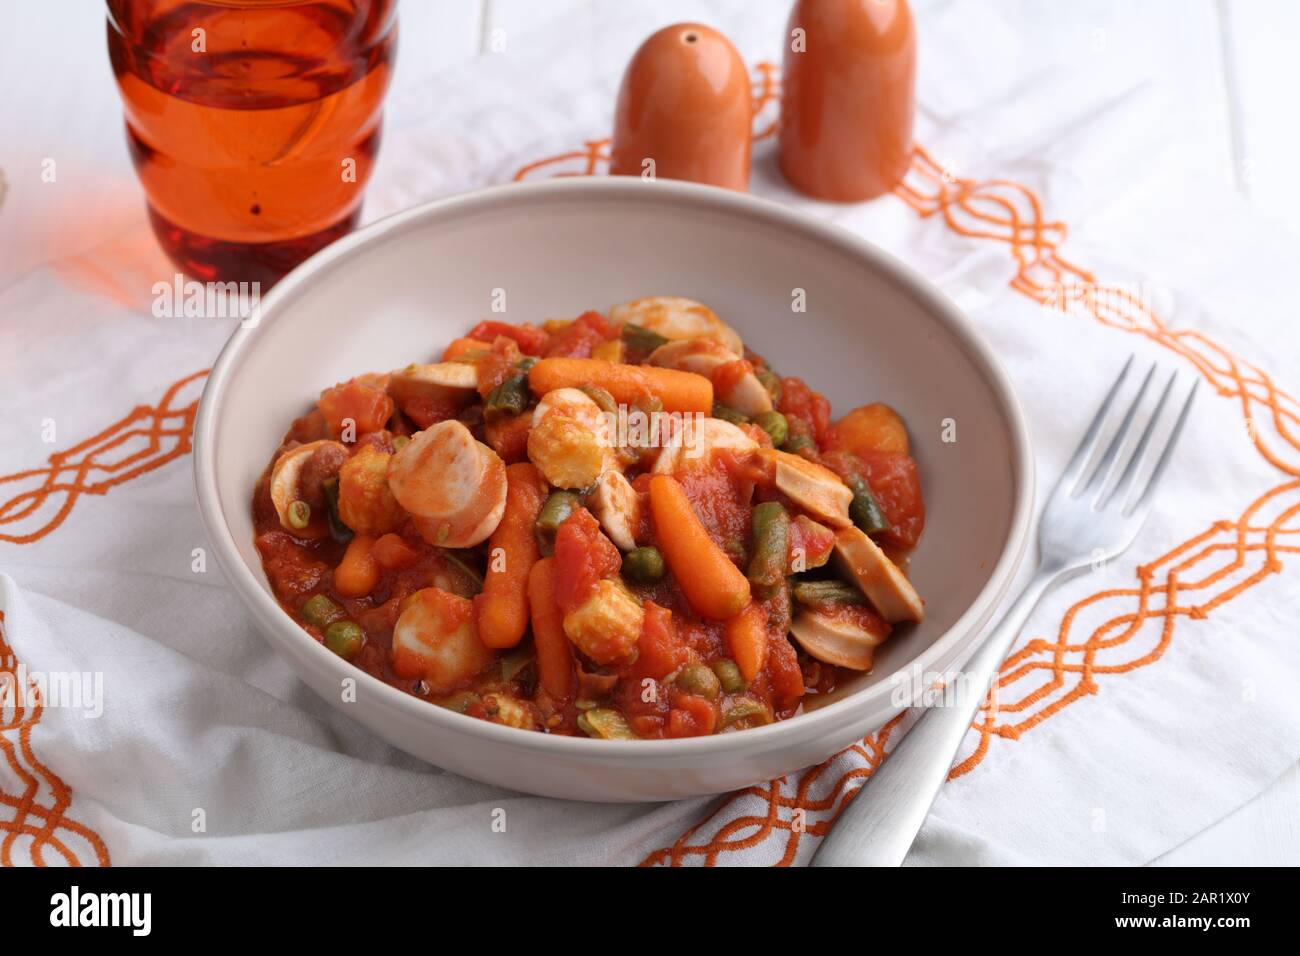 Chicken sausage and vegetable ragout with carrot, corn, green bean, pepper, green pea, and tomato sauce Stock Photo